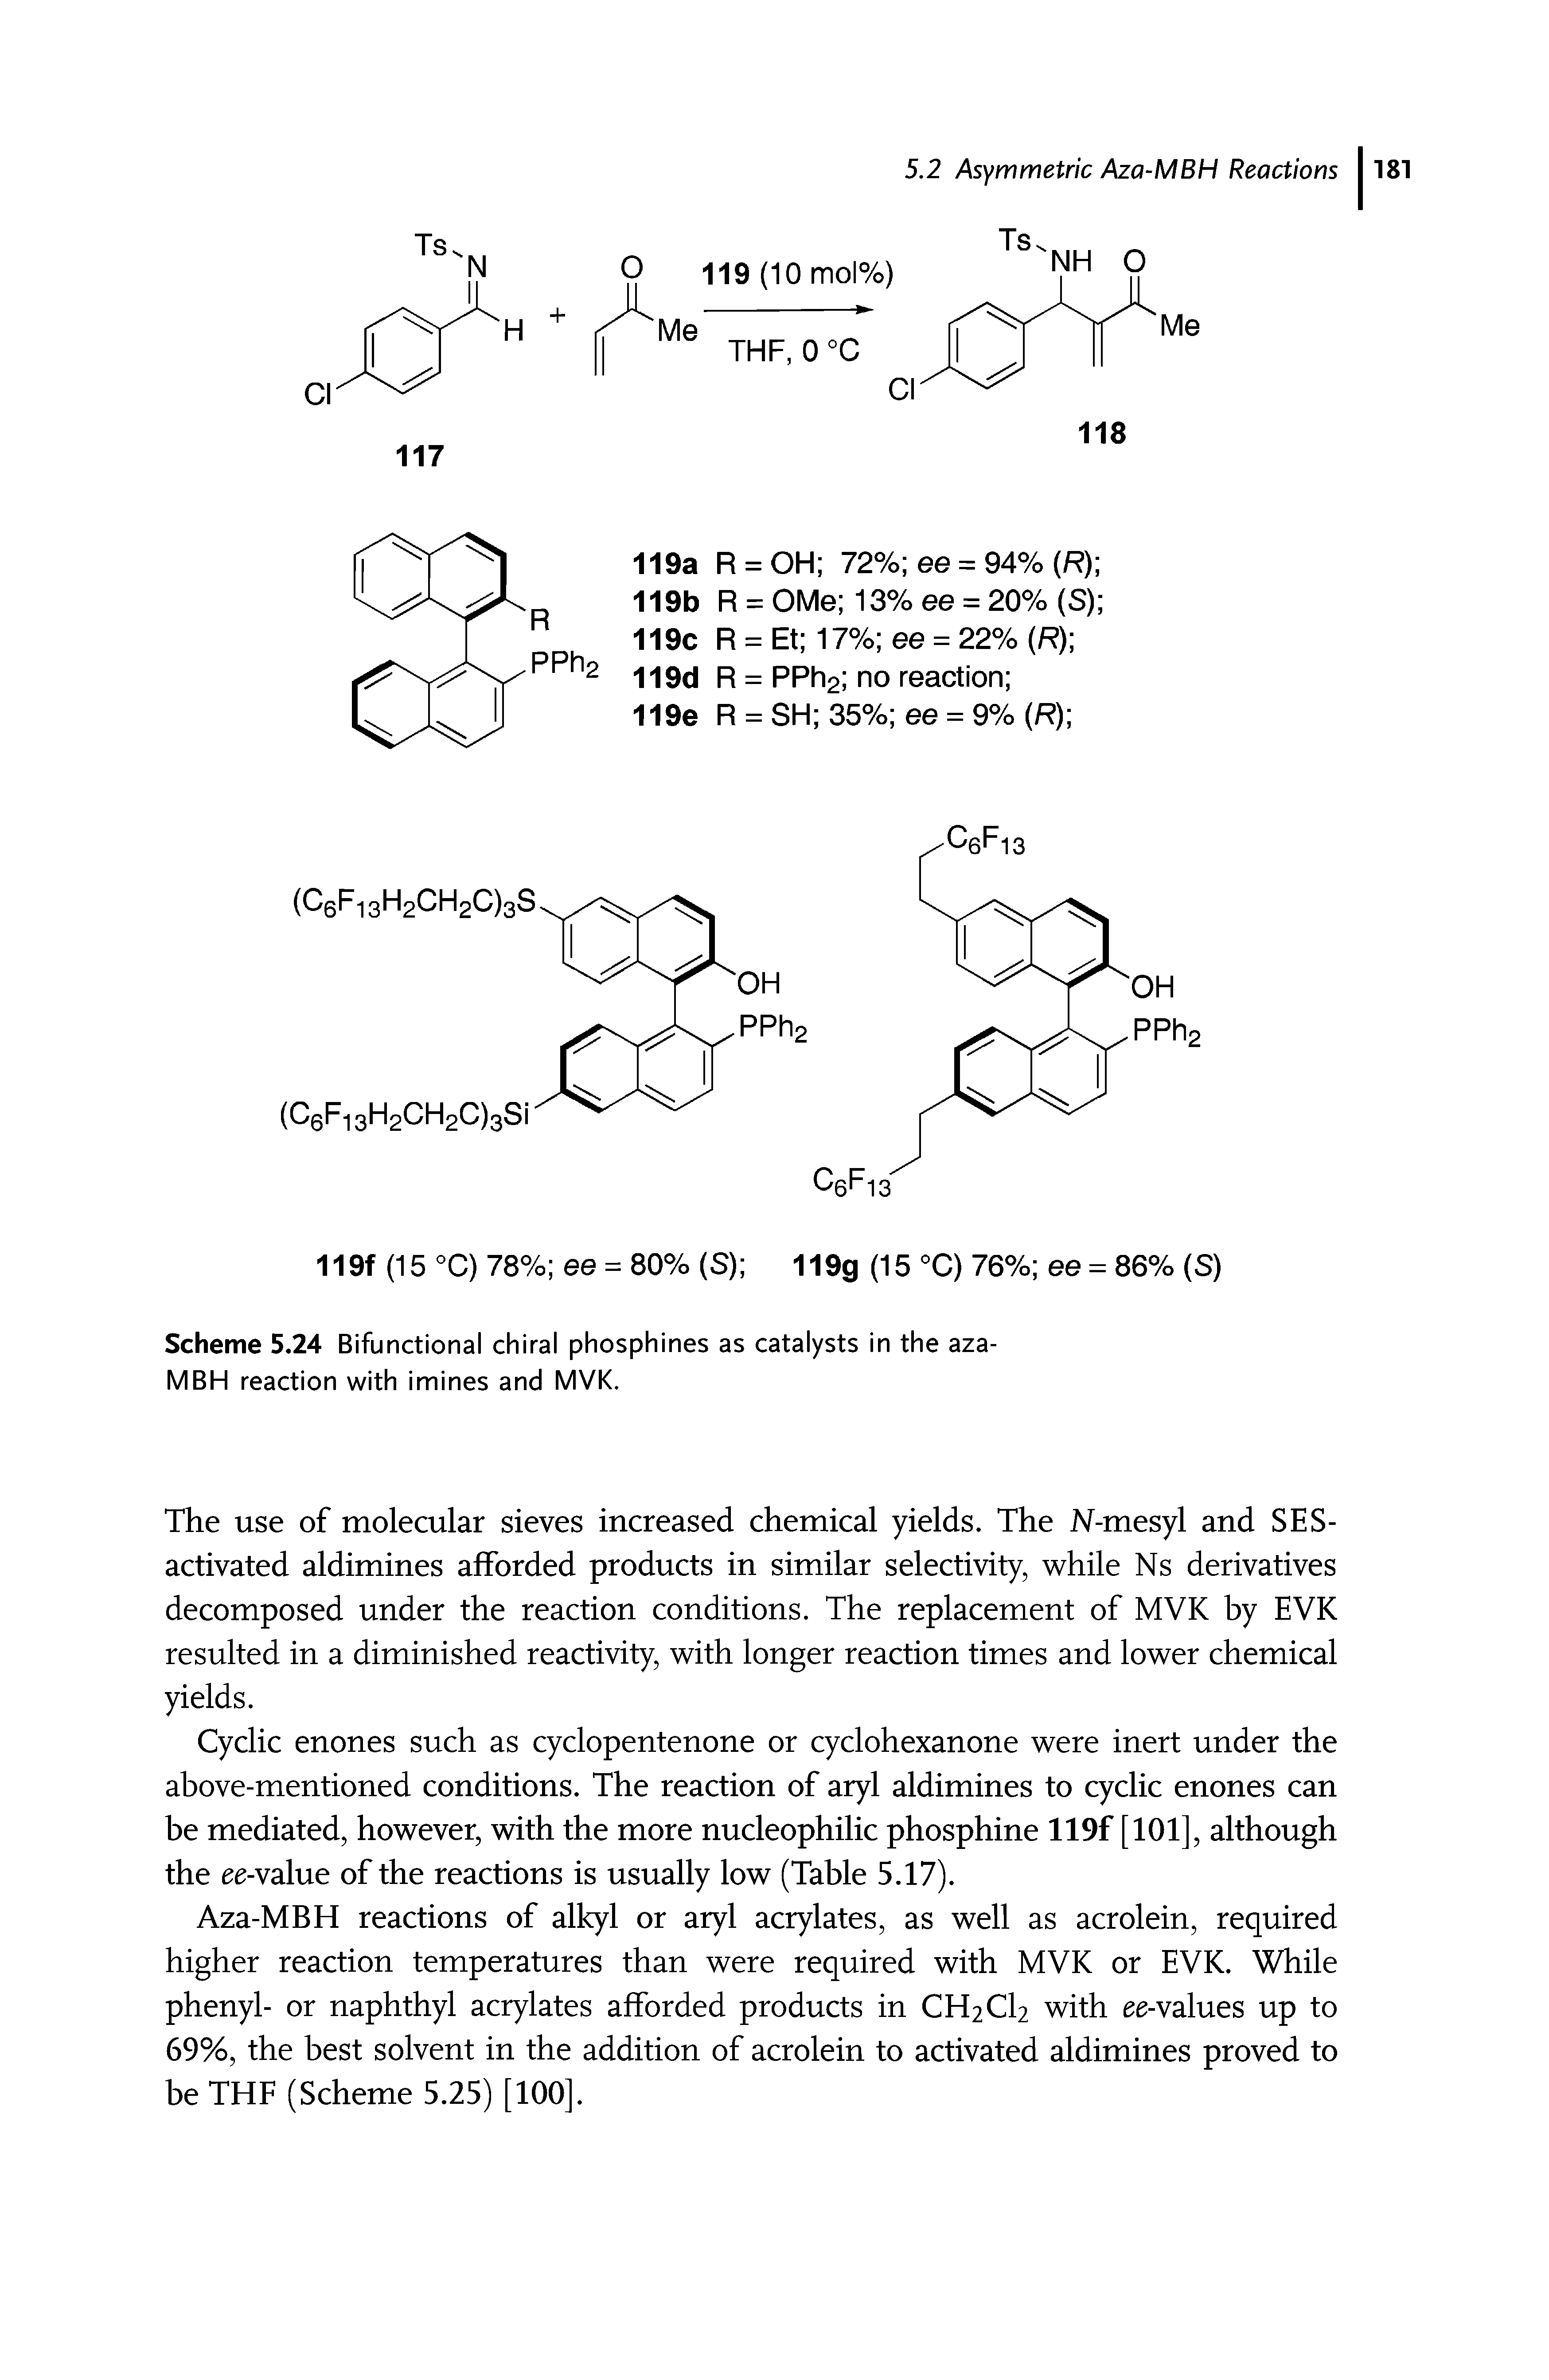 Scheme 5.24 Bifunctional chiral phosphines as catalysts in the aza-MBH reaction with imines and MVK.